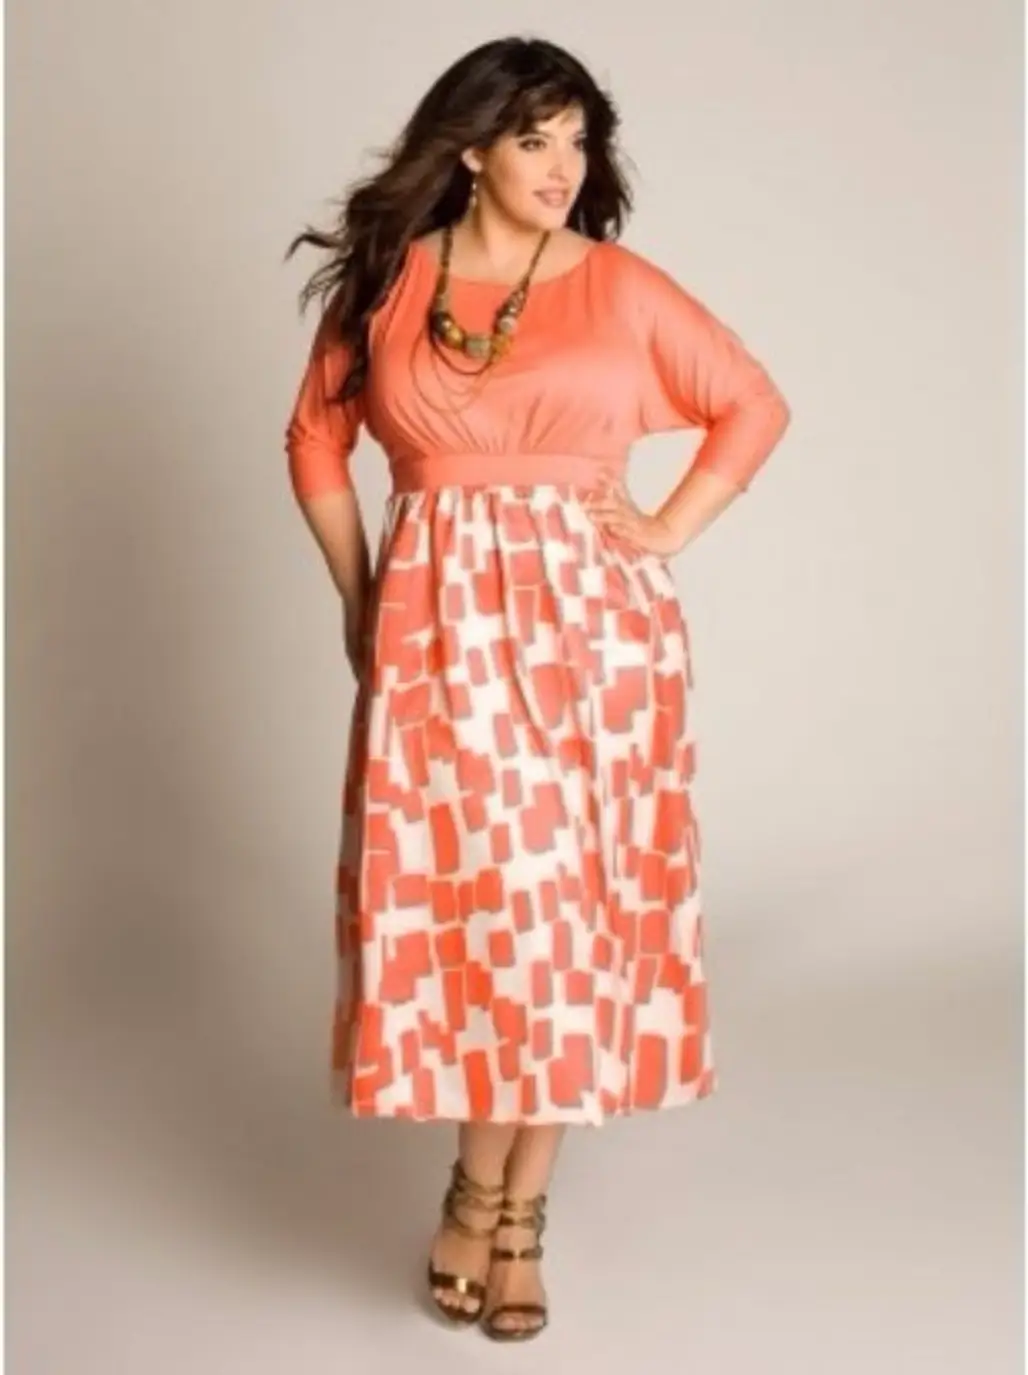 Confirm Your Curves in Coral